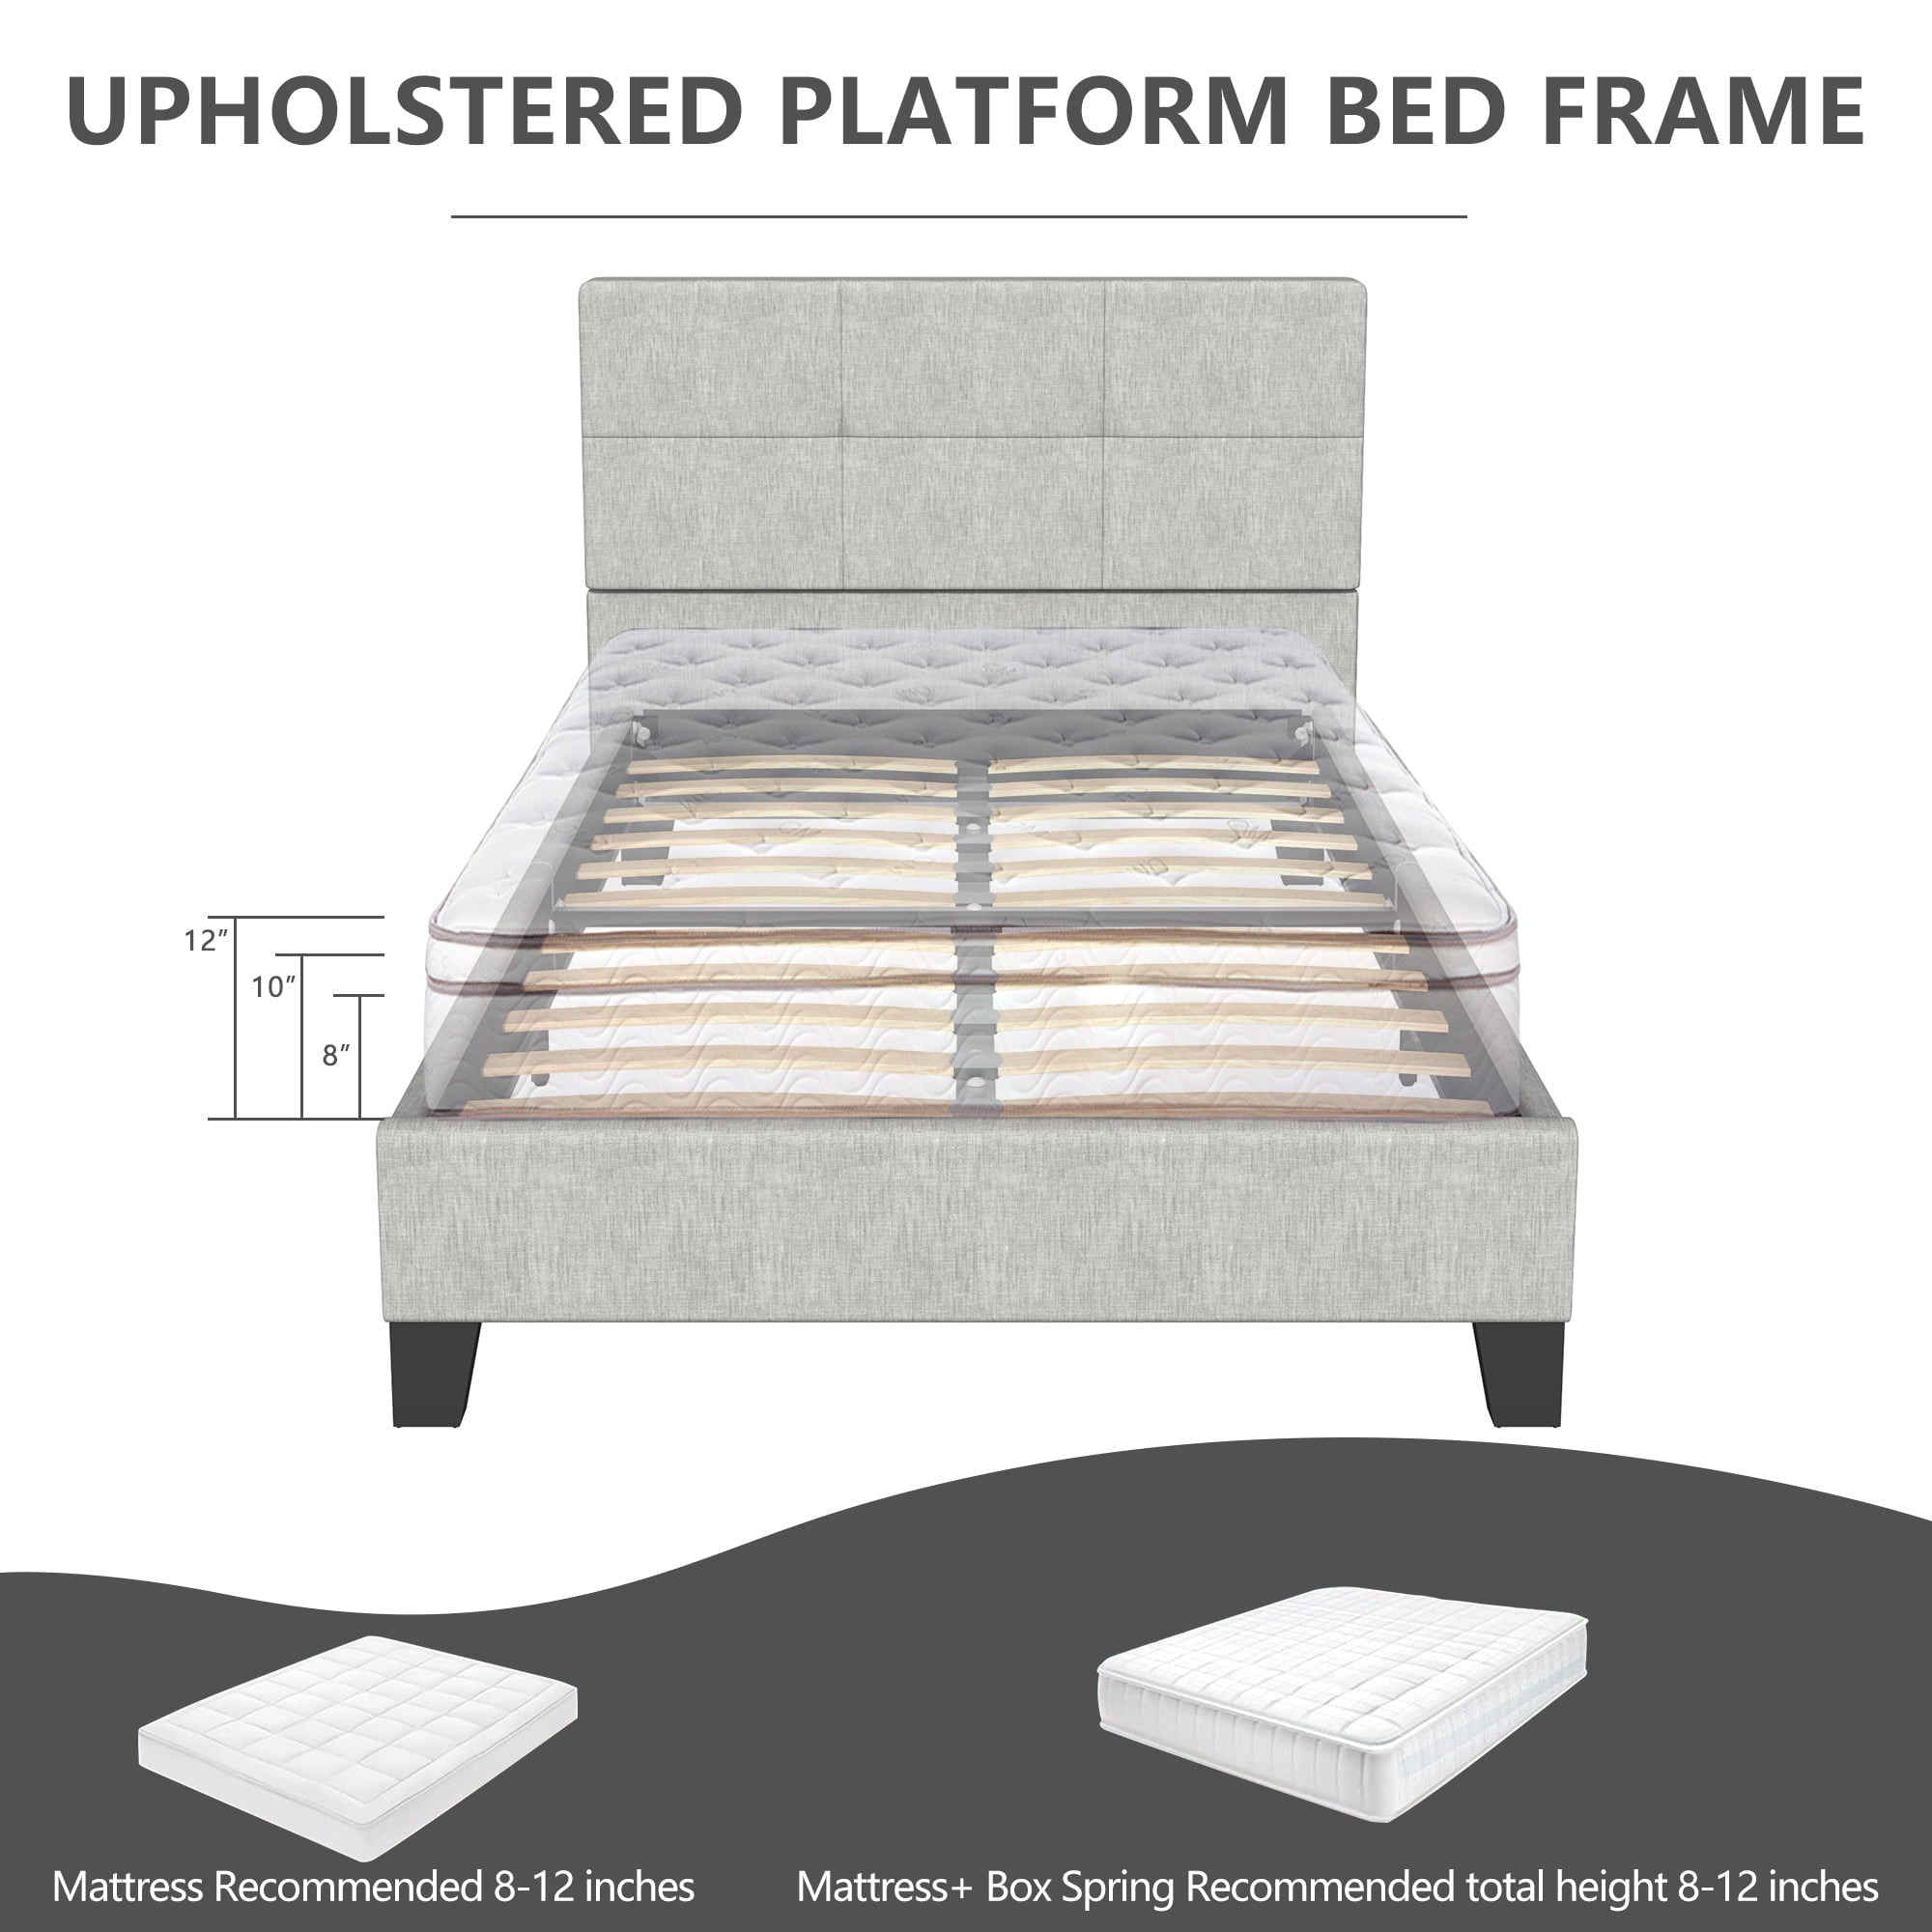 uhomepro Gray Twin Bed Frame for Adults Kids, Modern Fabric Upholstered Platform Bed Frame with Headboard, Twin Size Bed Frame Bedroom Furniture with Wood Slats Support, No Box Spring Needed